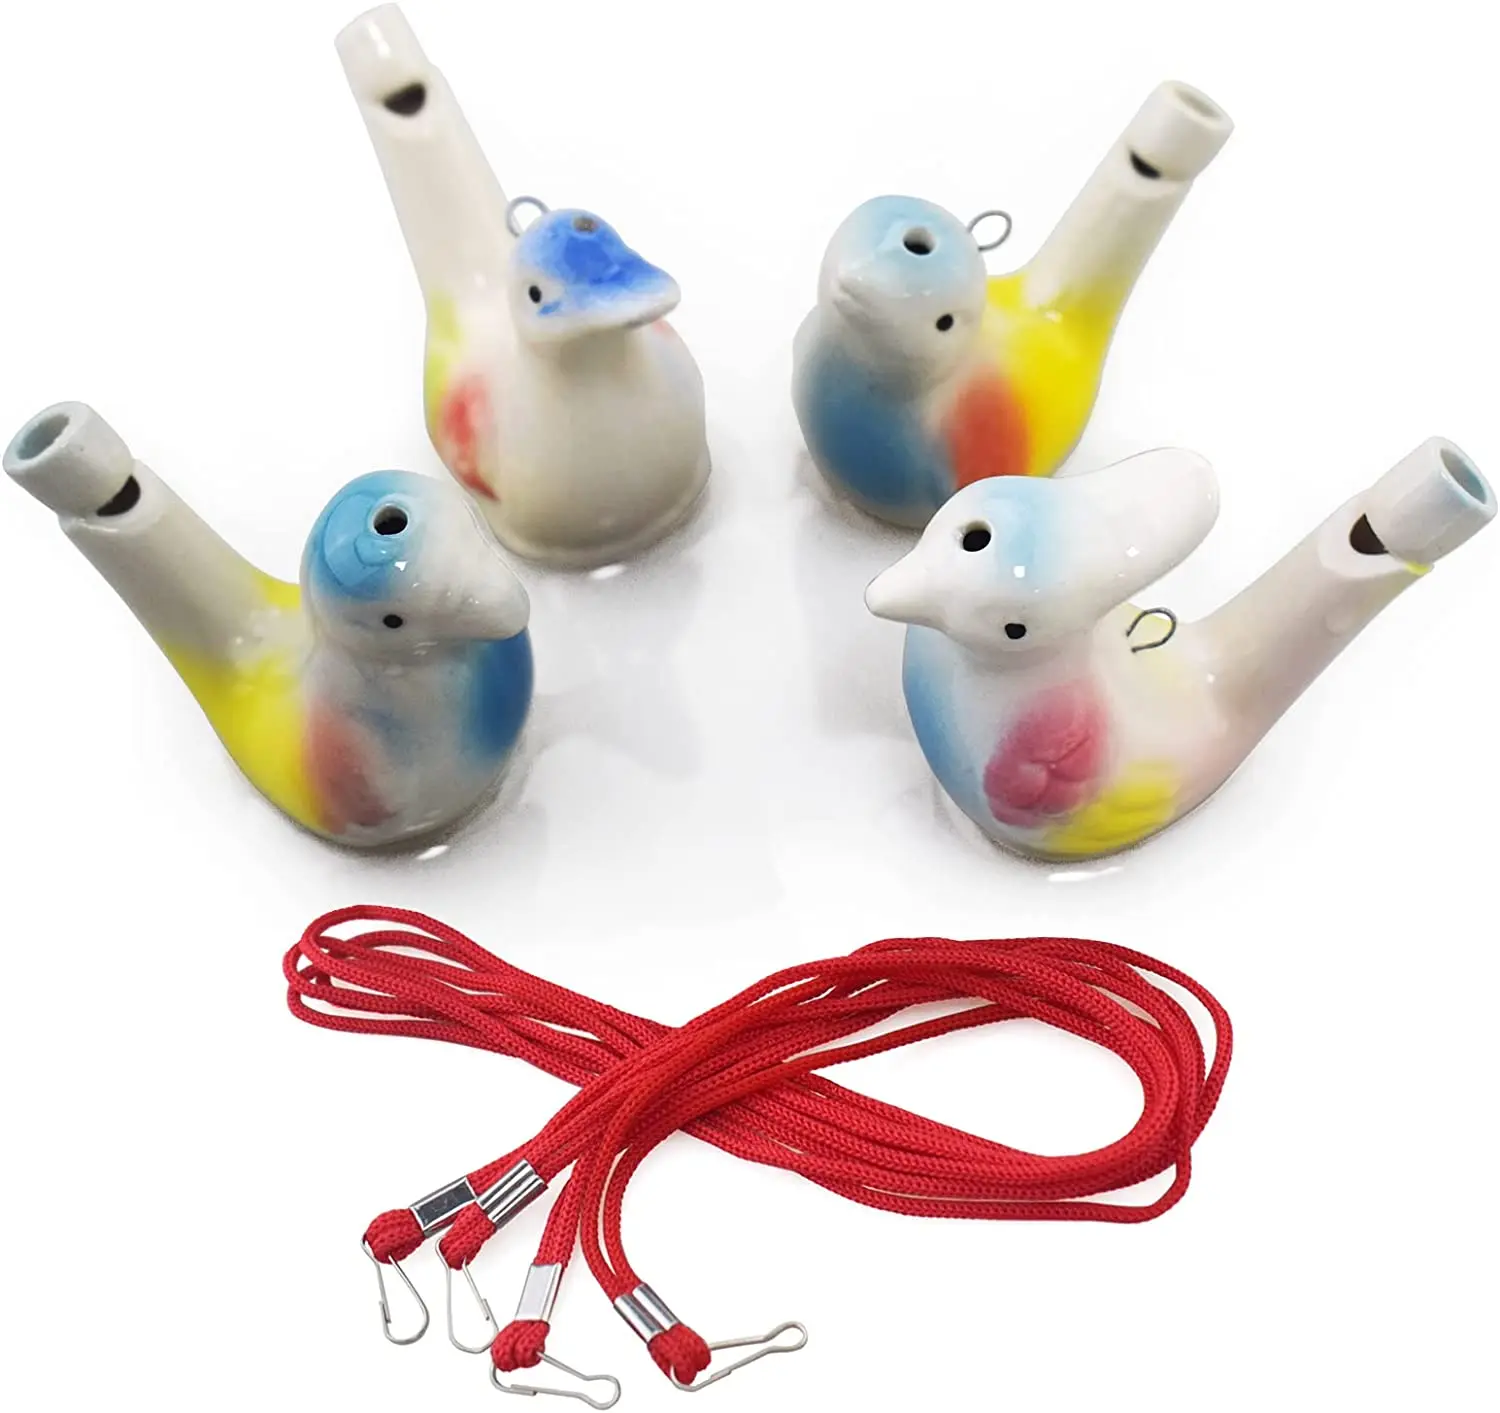 Ceramic Clay Water Bird Whistle Animal Sound Whistle Kids Toys Gift For  Sale - Buy Ceramic Water Whistles,Bird Whistle Animal Sound Whistle,Water  Bird Whistle Ceramic Toys With Rope Product on 